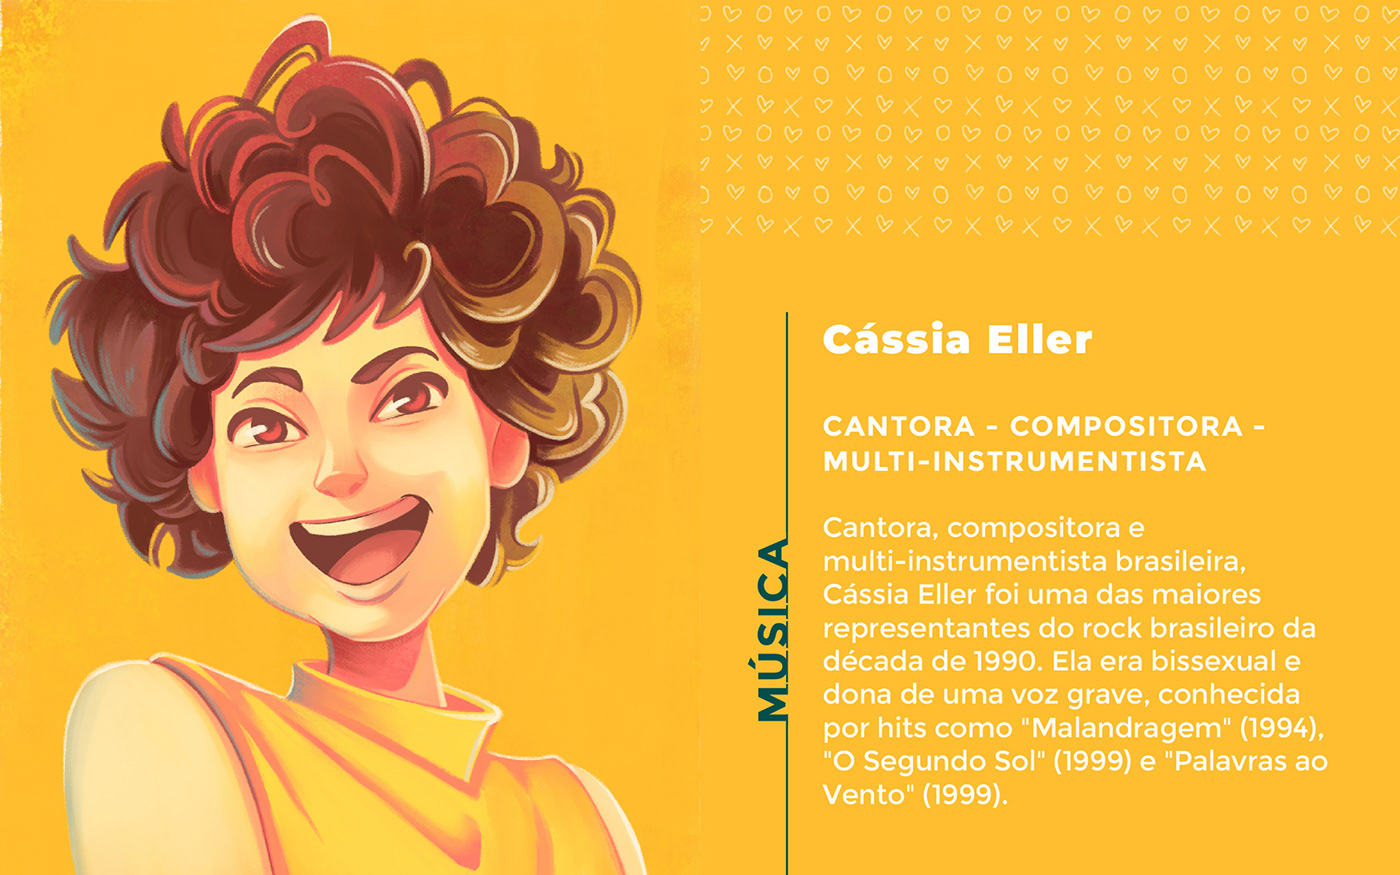 An illustrated portrait of Cassia Eller a famous brazilian singer and  songwriter.
